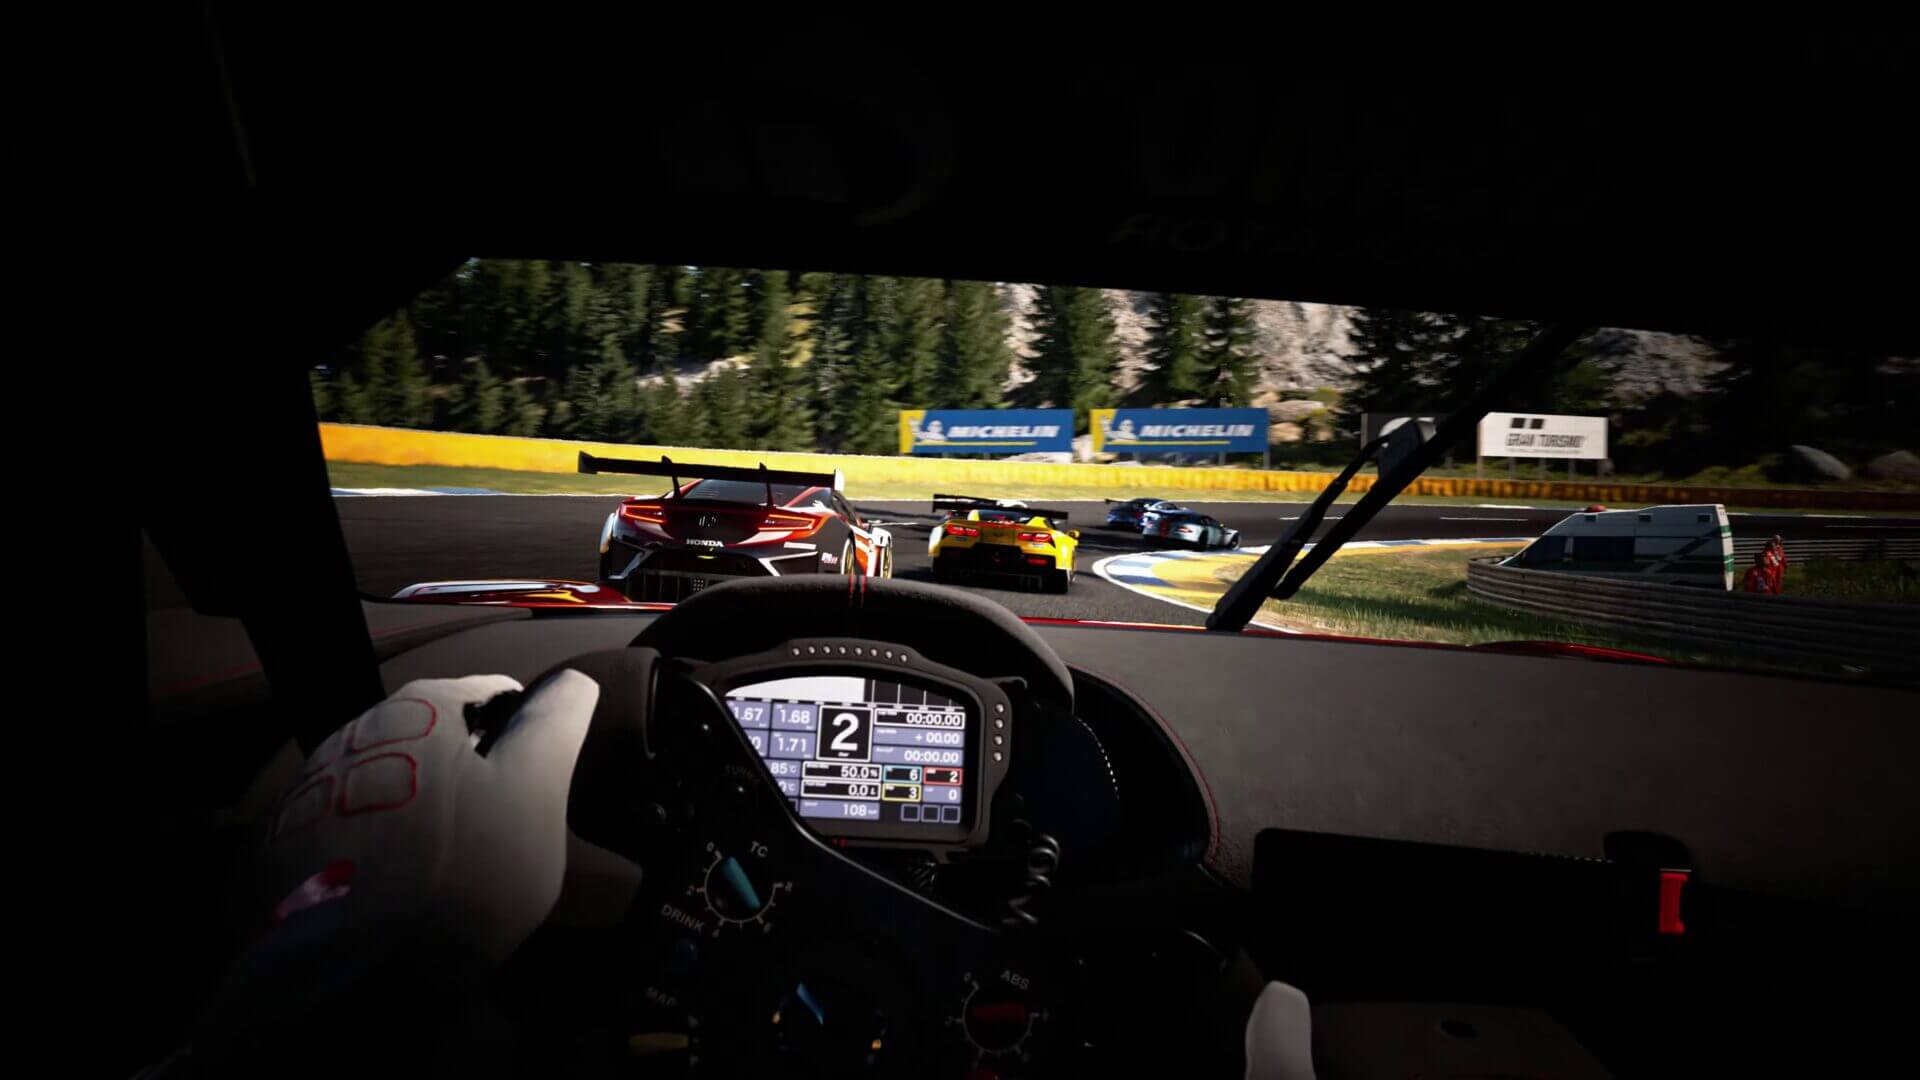 Get an early look at Gran Turismo 7 for PS5 - CNET